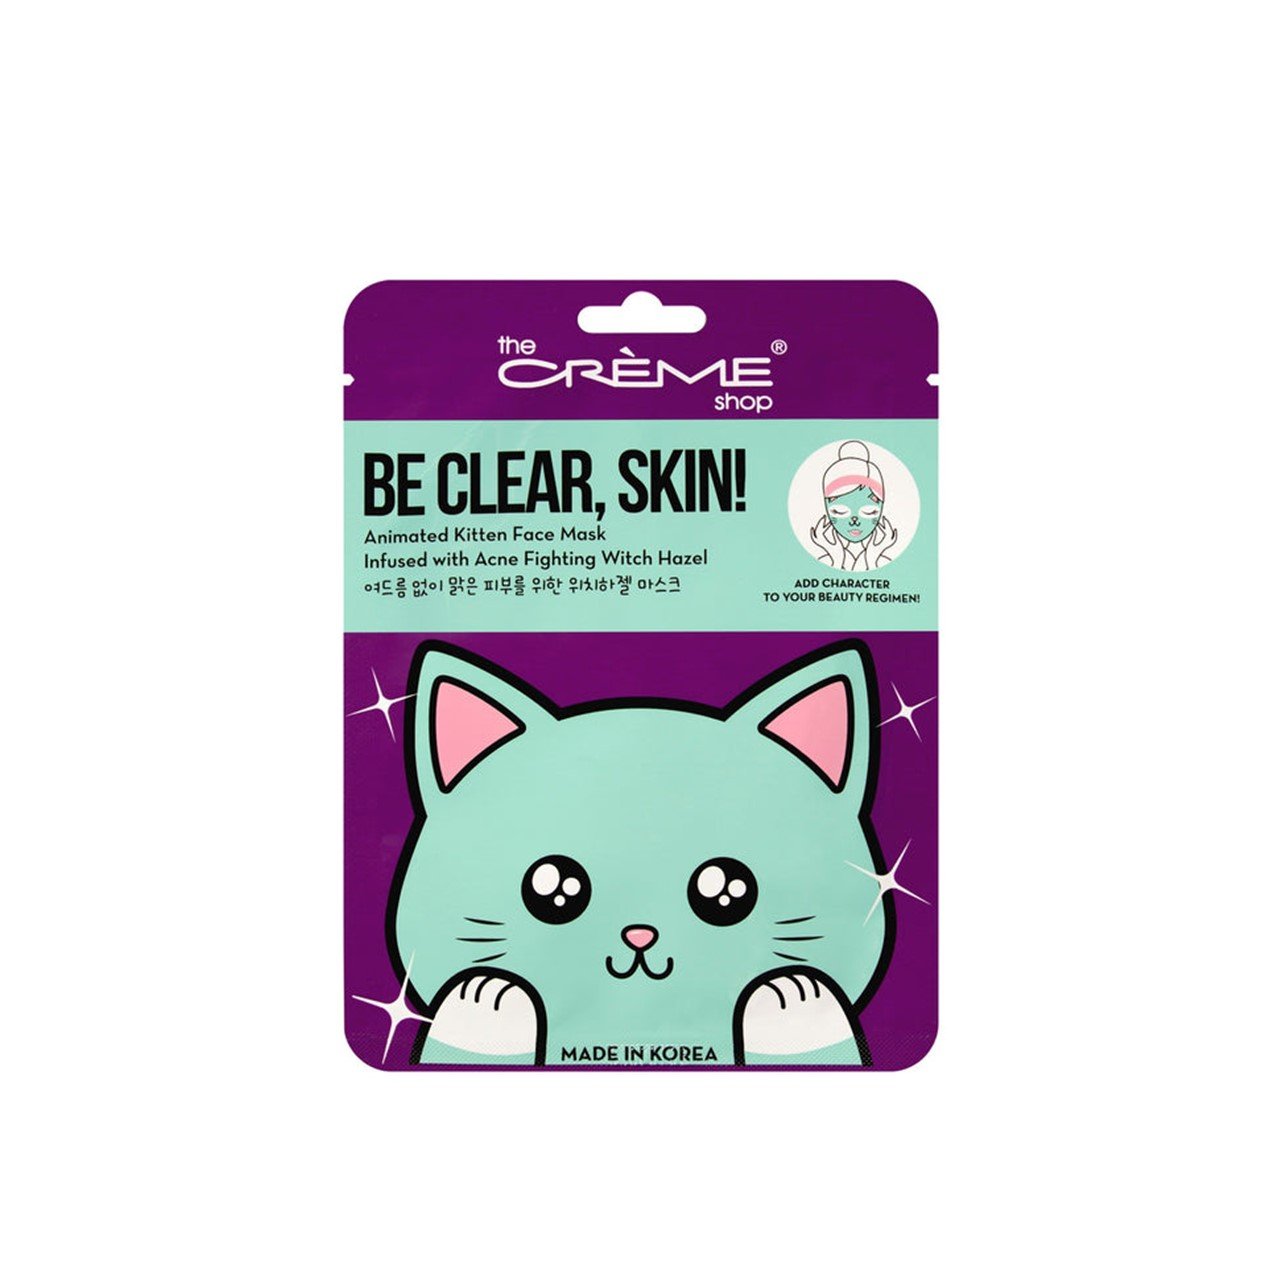 The Crème Shop Be Clear, Skin! Animated Kitten Face Mask 25g (0.88 oz)